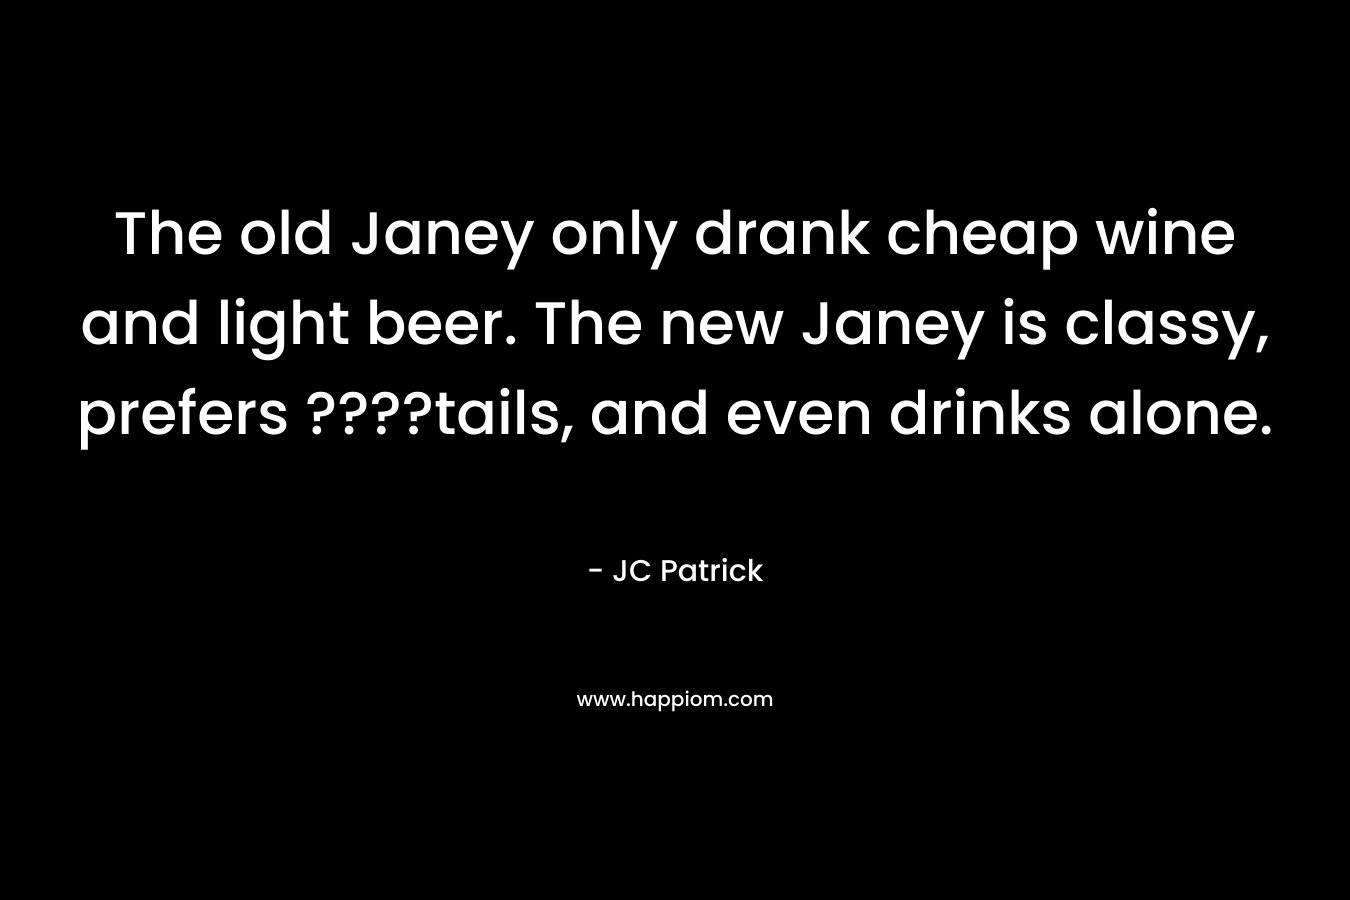 The old Janey only drank cheap wine and light beer. The new Janey is classy, prefers ????tails, and even drinks alone.